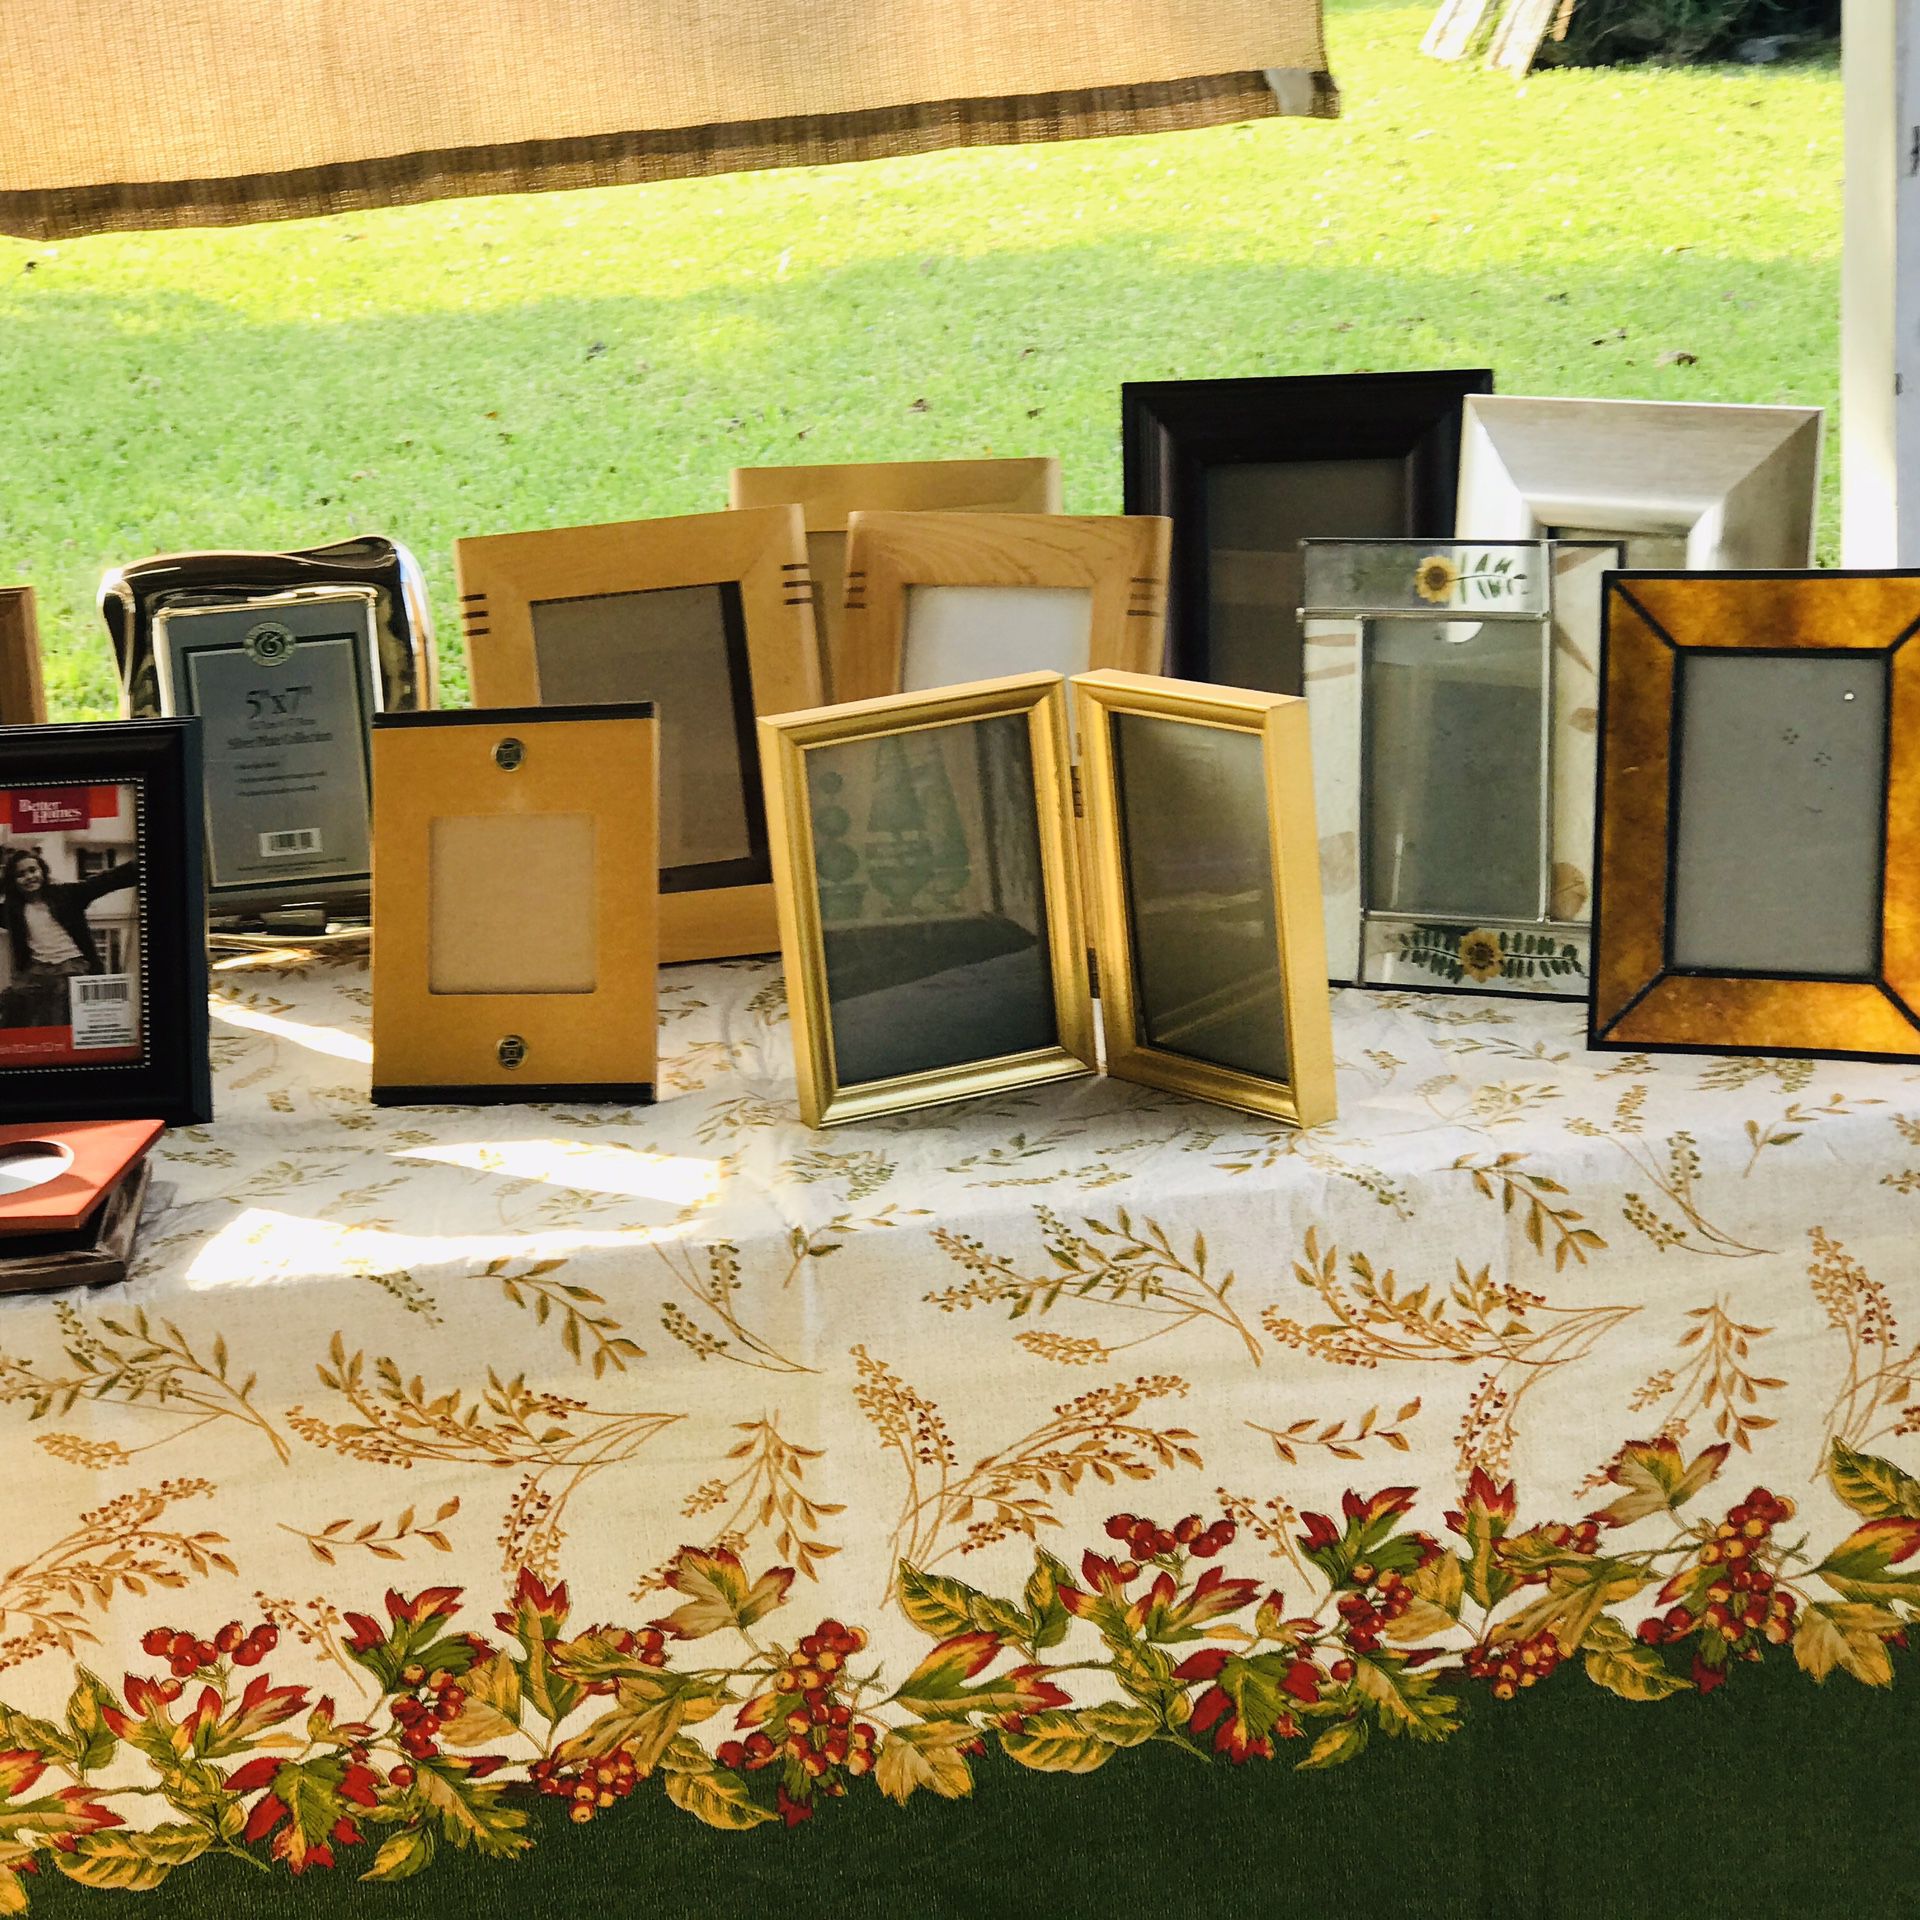 New and used 5x7 and 4x6 frames$1-$5